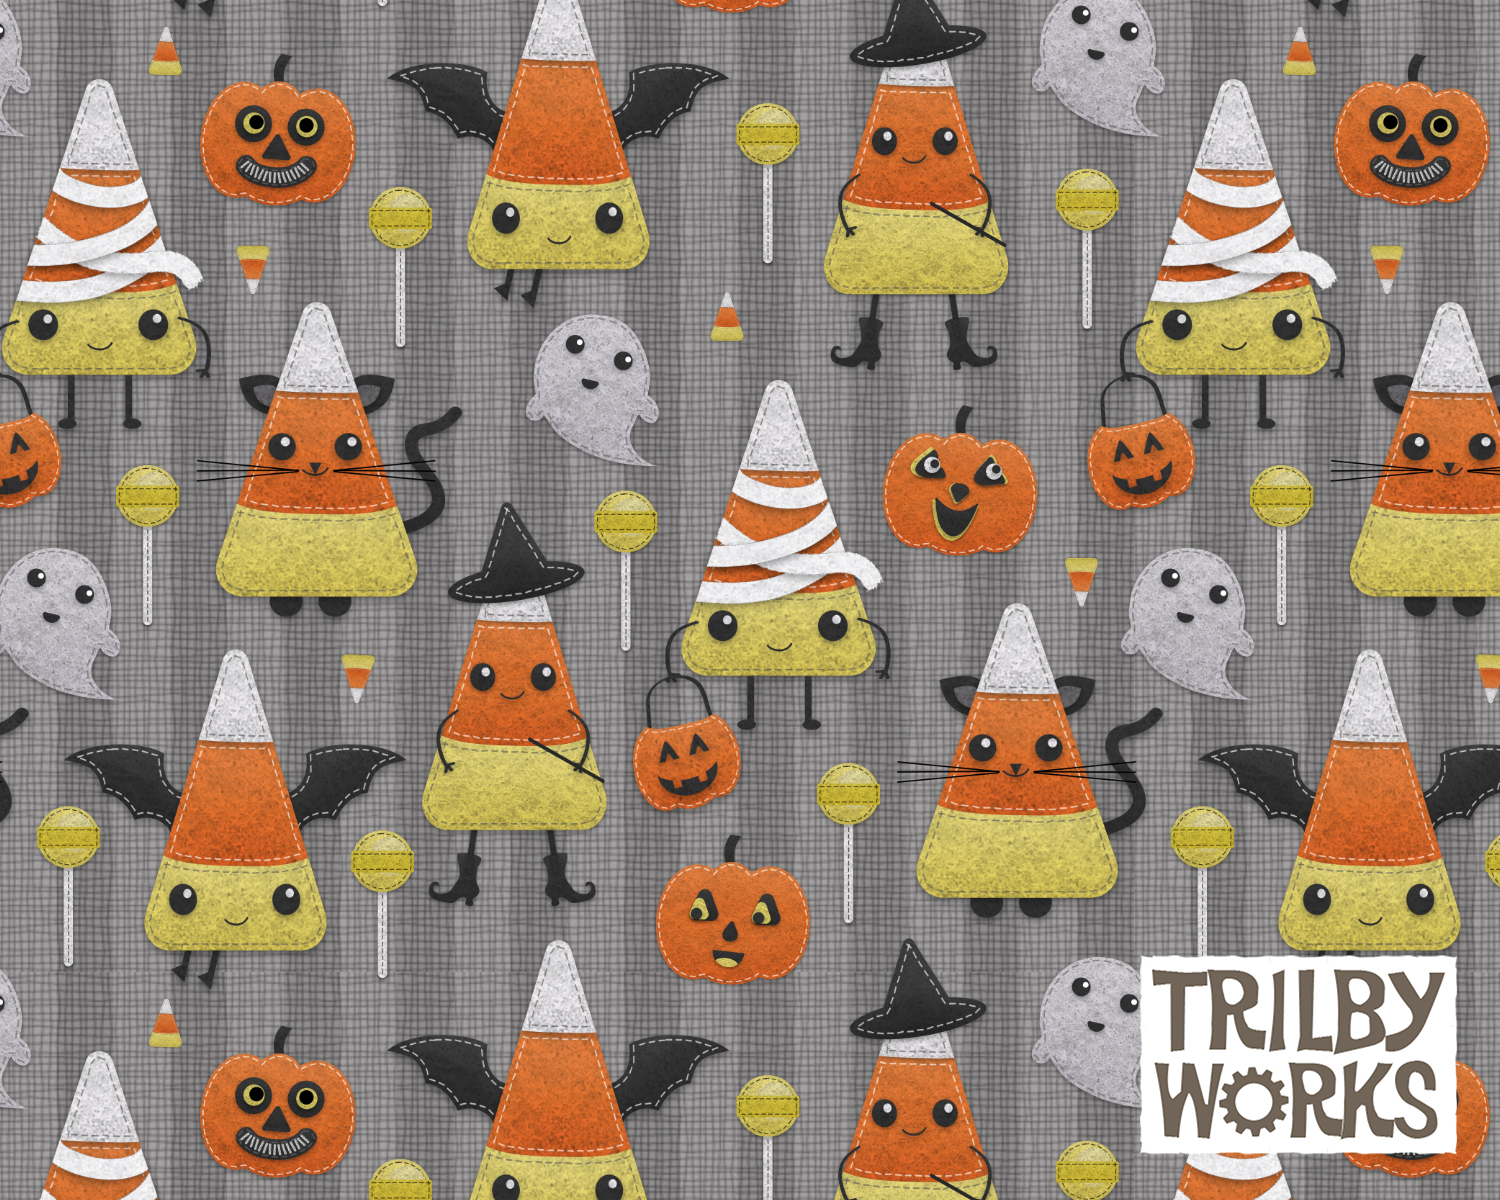 Candy Corn Trick or Treat by Trilby Works